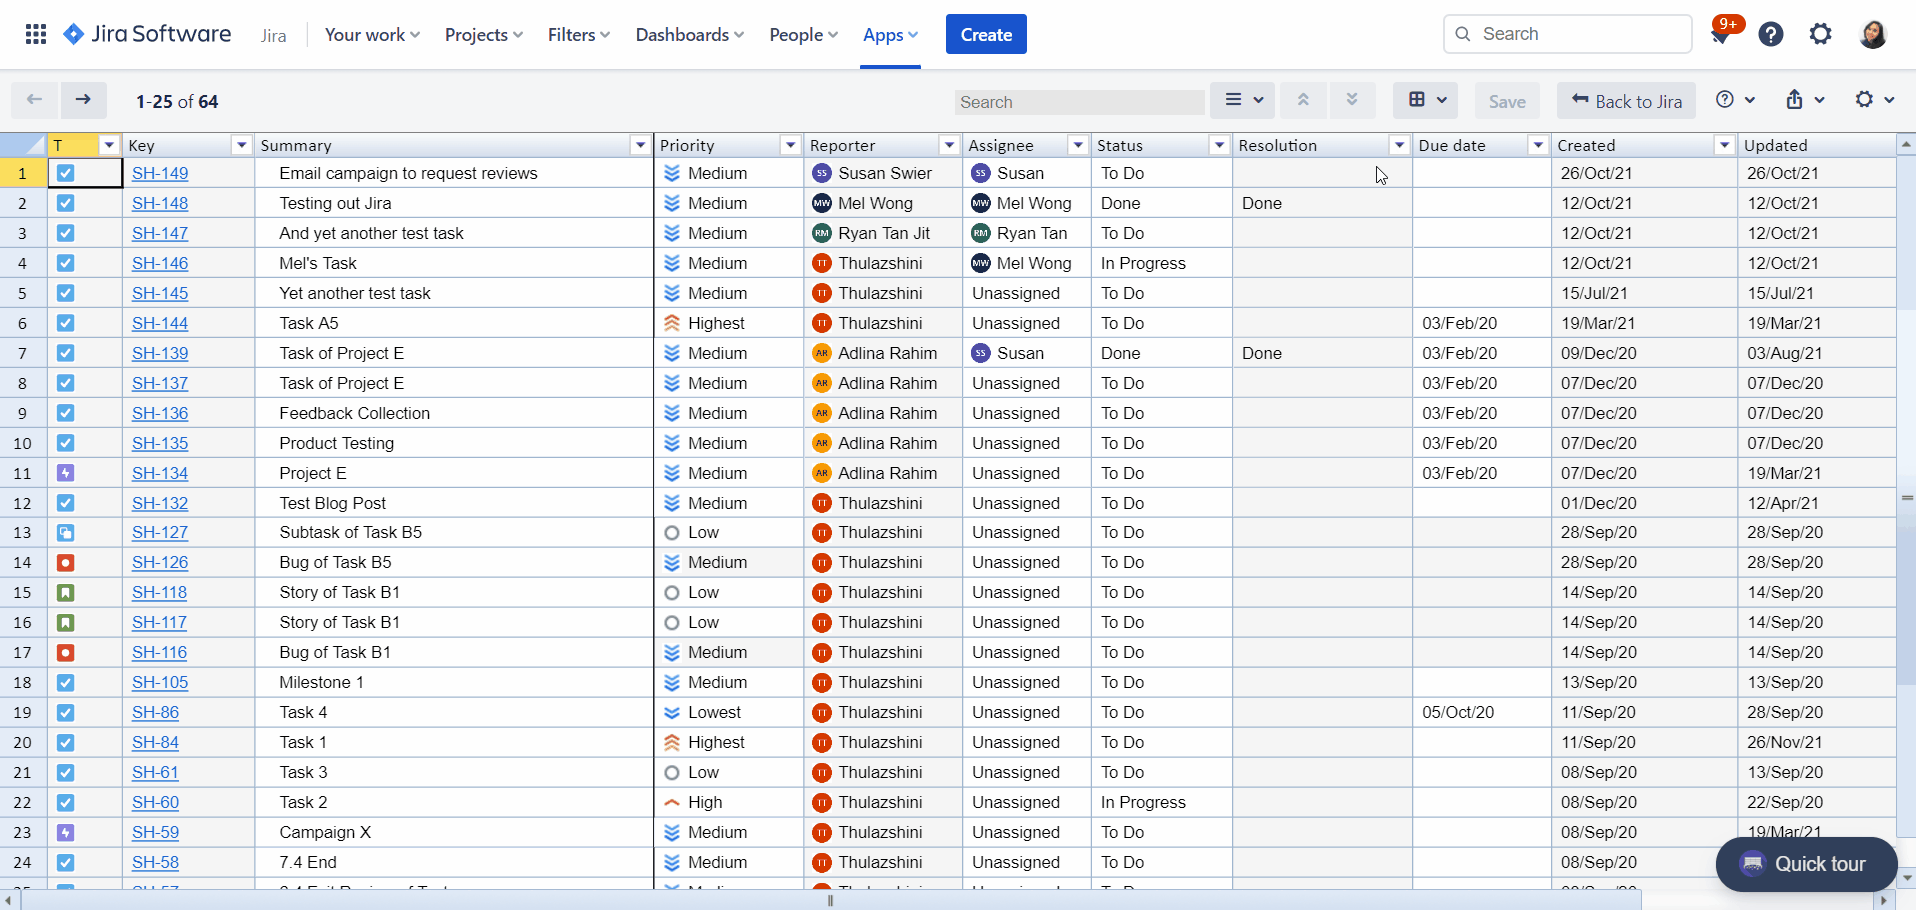 View all Jira issues in one screen, in hierarchies.